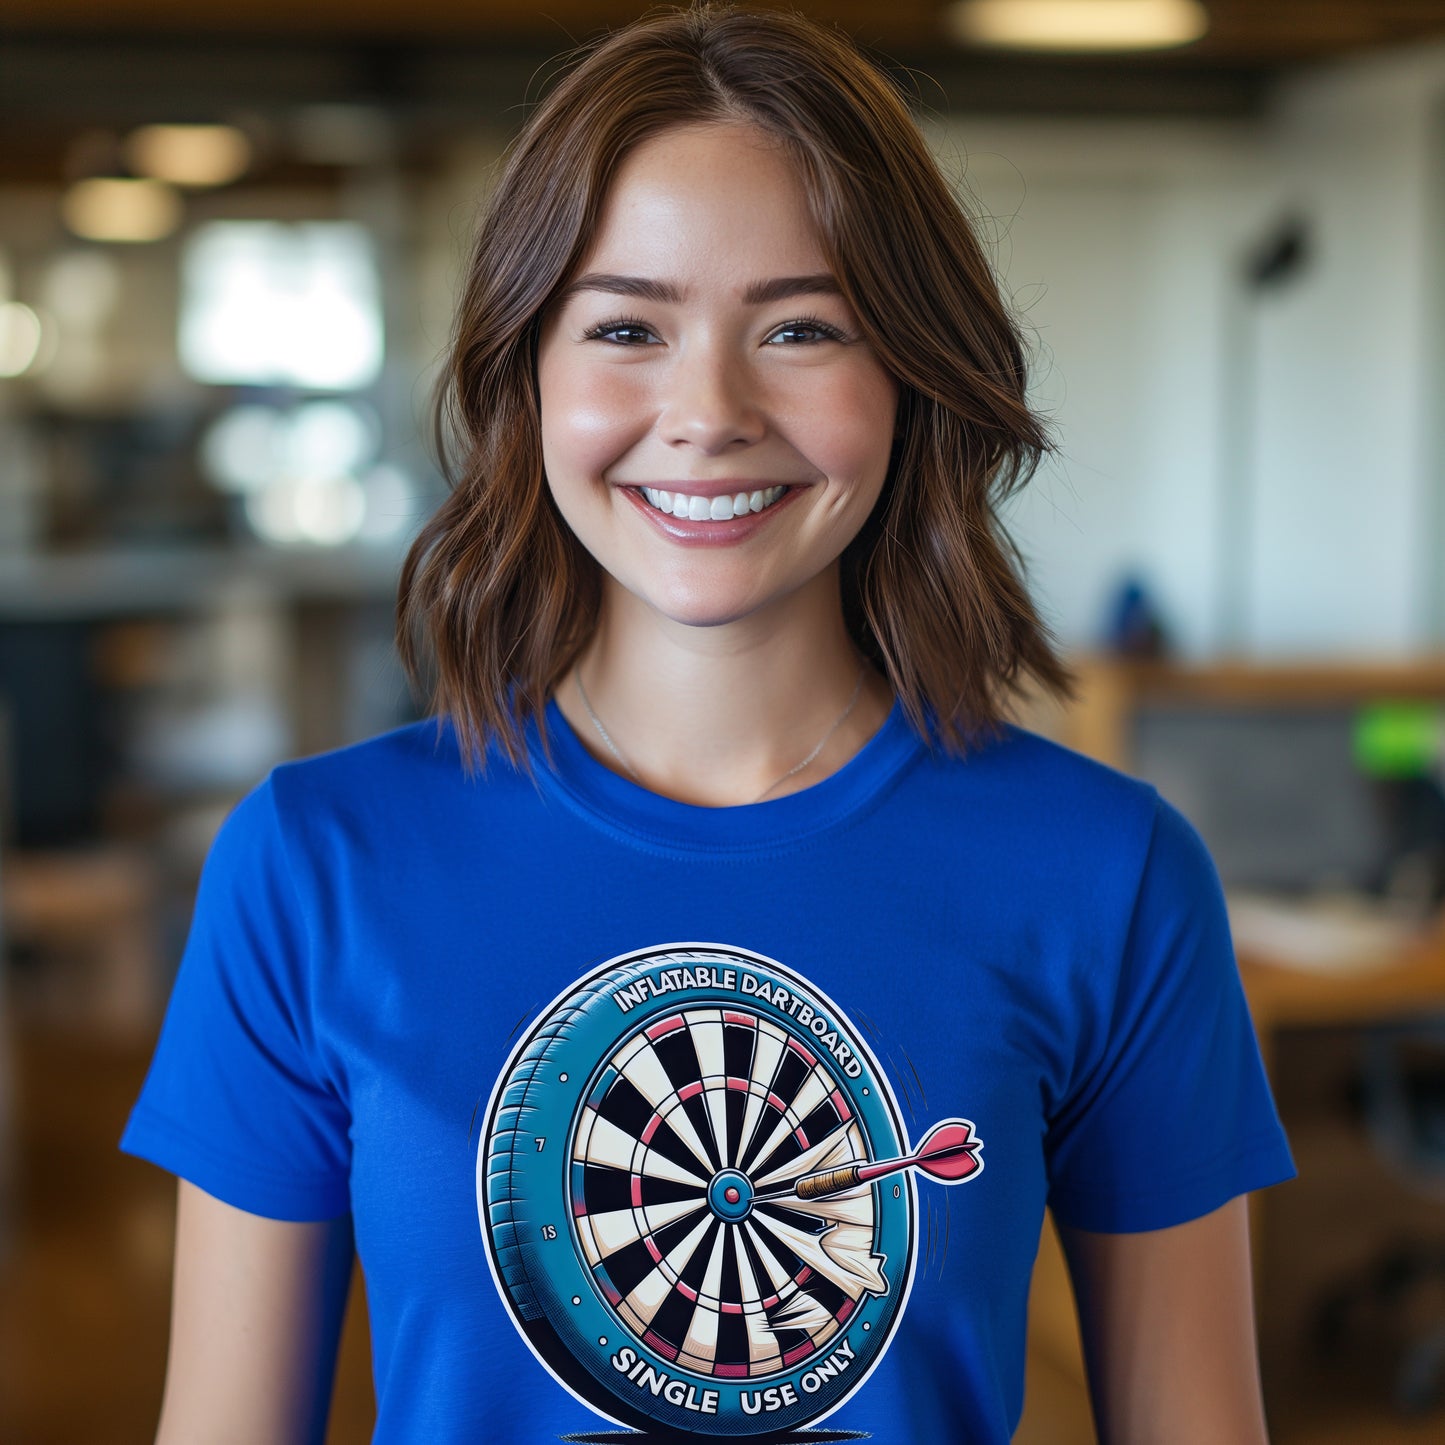 Inflatable Dartboard T-Shirt: Single Use Only - Failed Invention - Perfect for Party Games Enthusiasts and Lovers of Funny T-Shirts